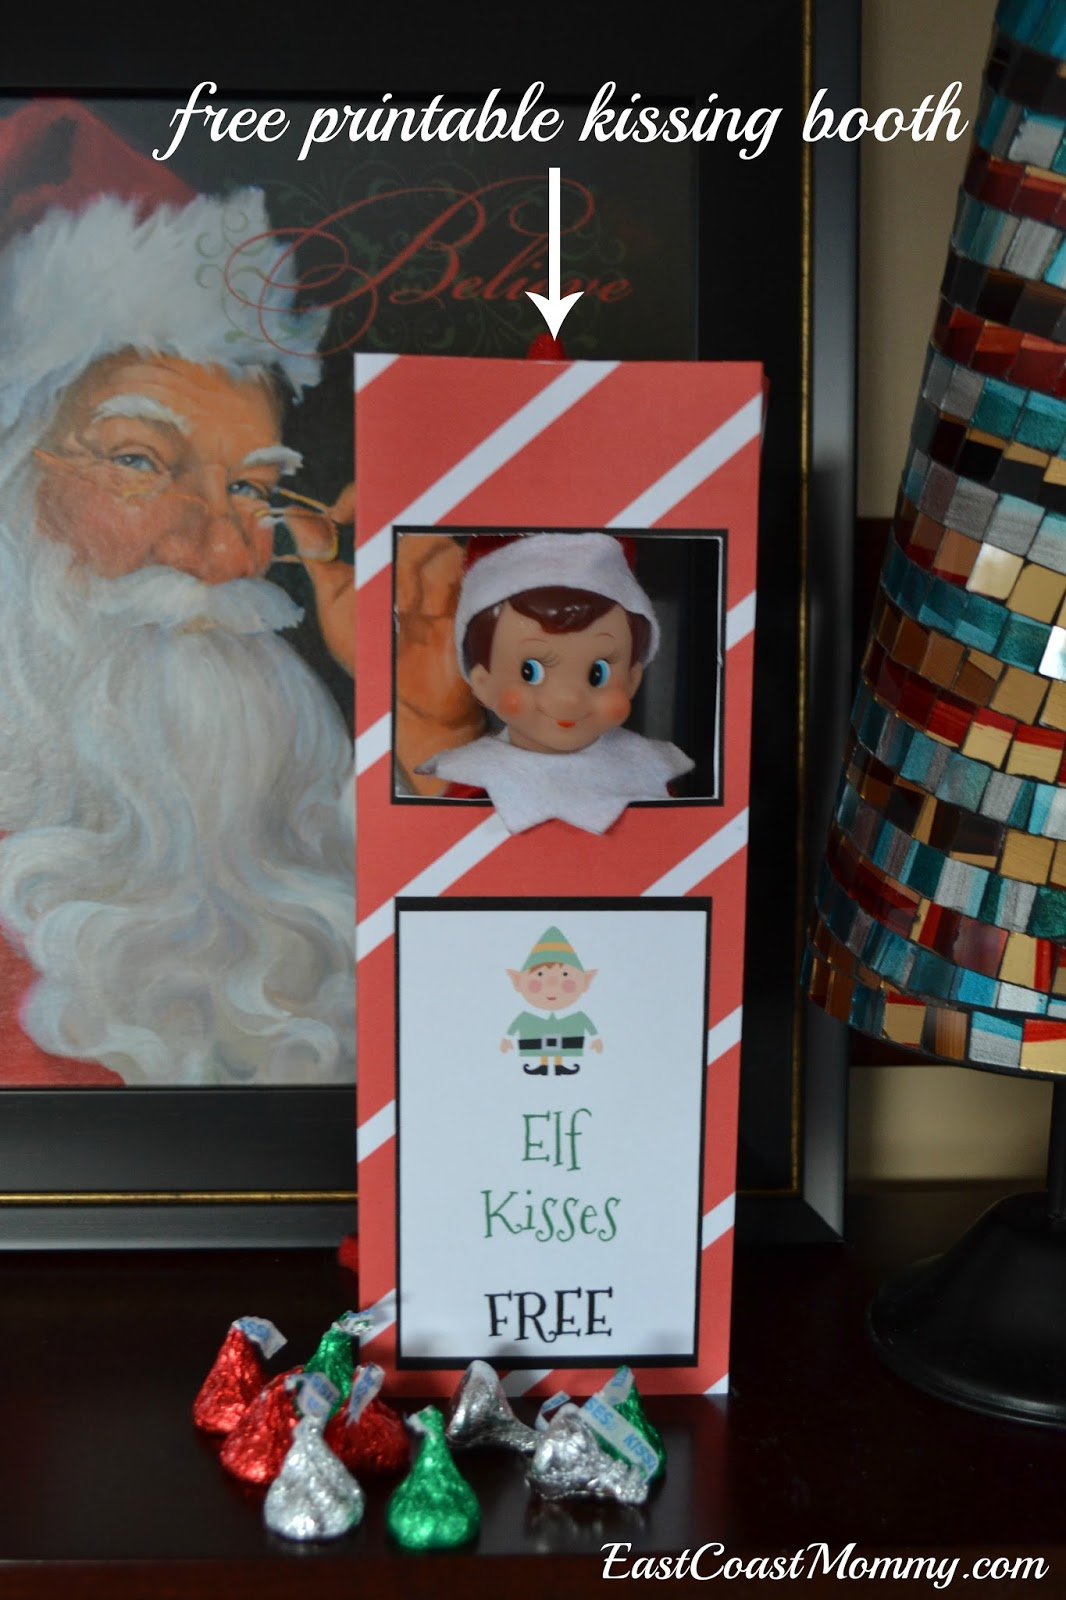 East Coast Mommy: Elf On The Shelf Kissing Booth (Free Printable) pertaining to Elf On The Shelf Kissing Booth Free Printable